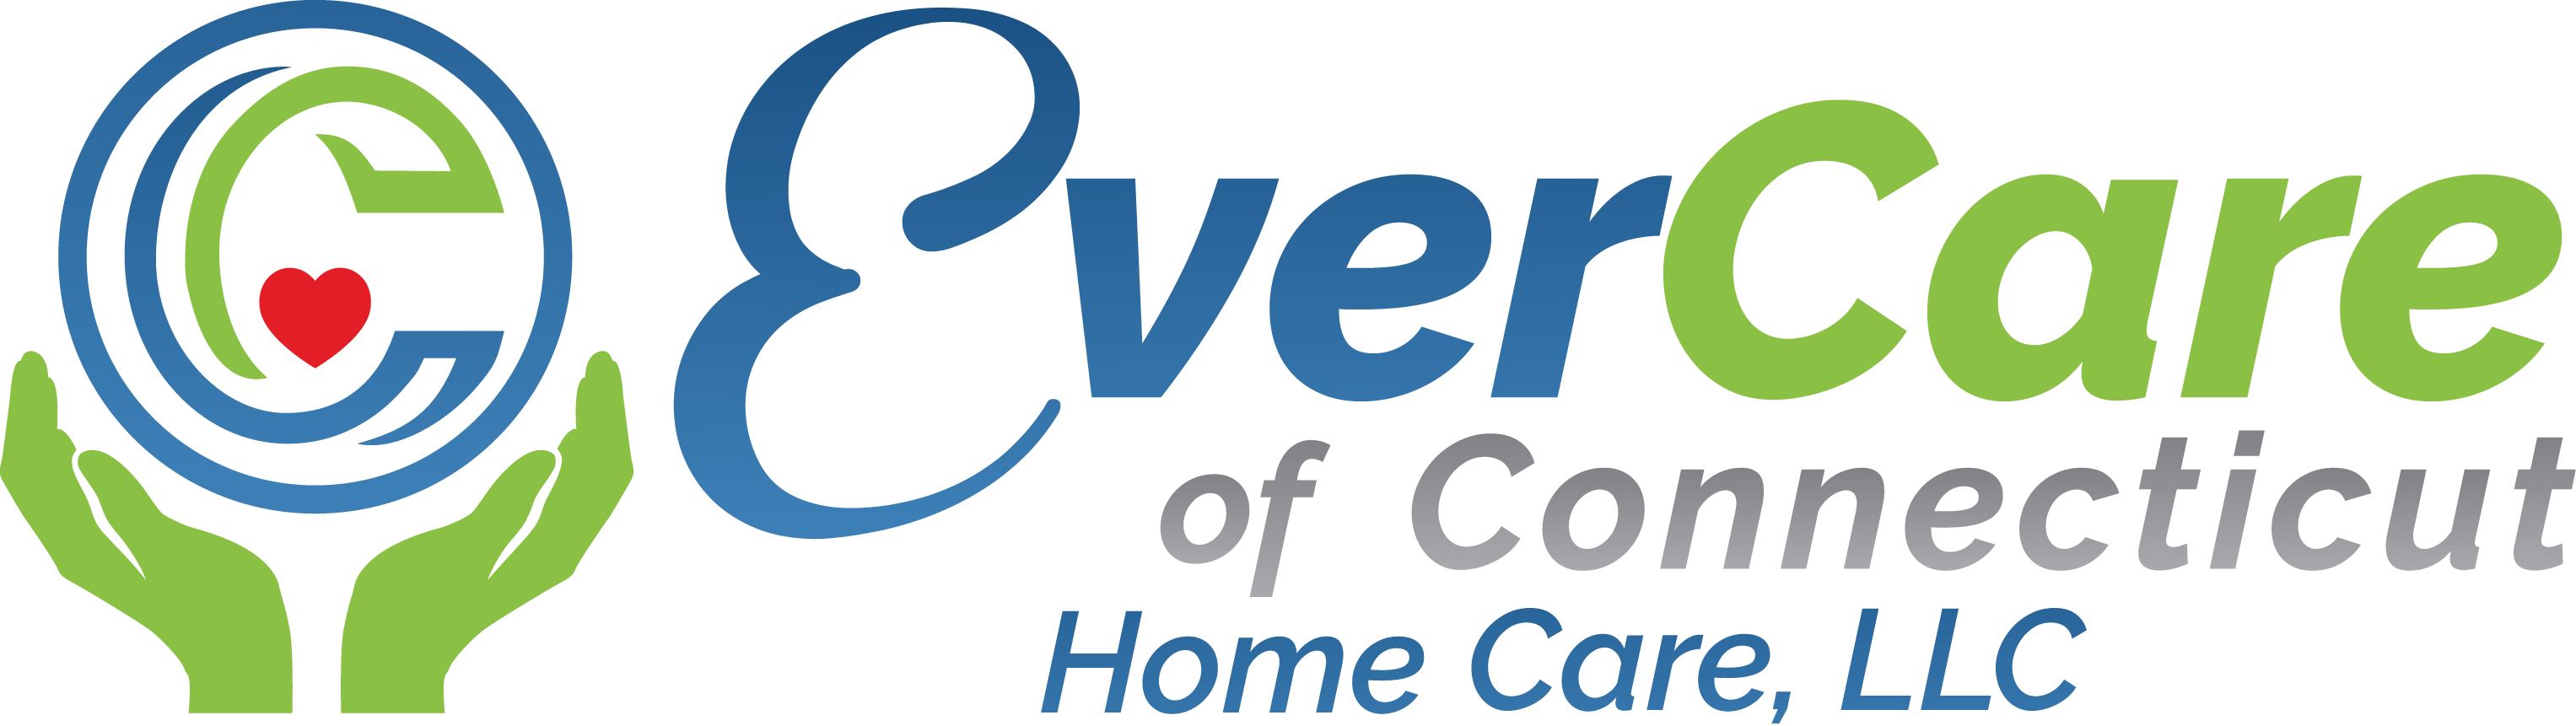 EverCare of Connecticut